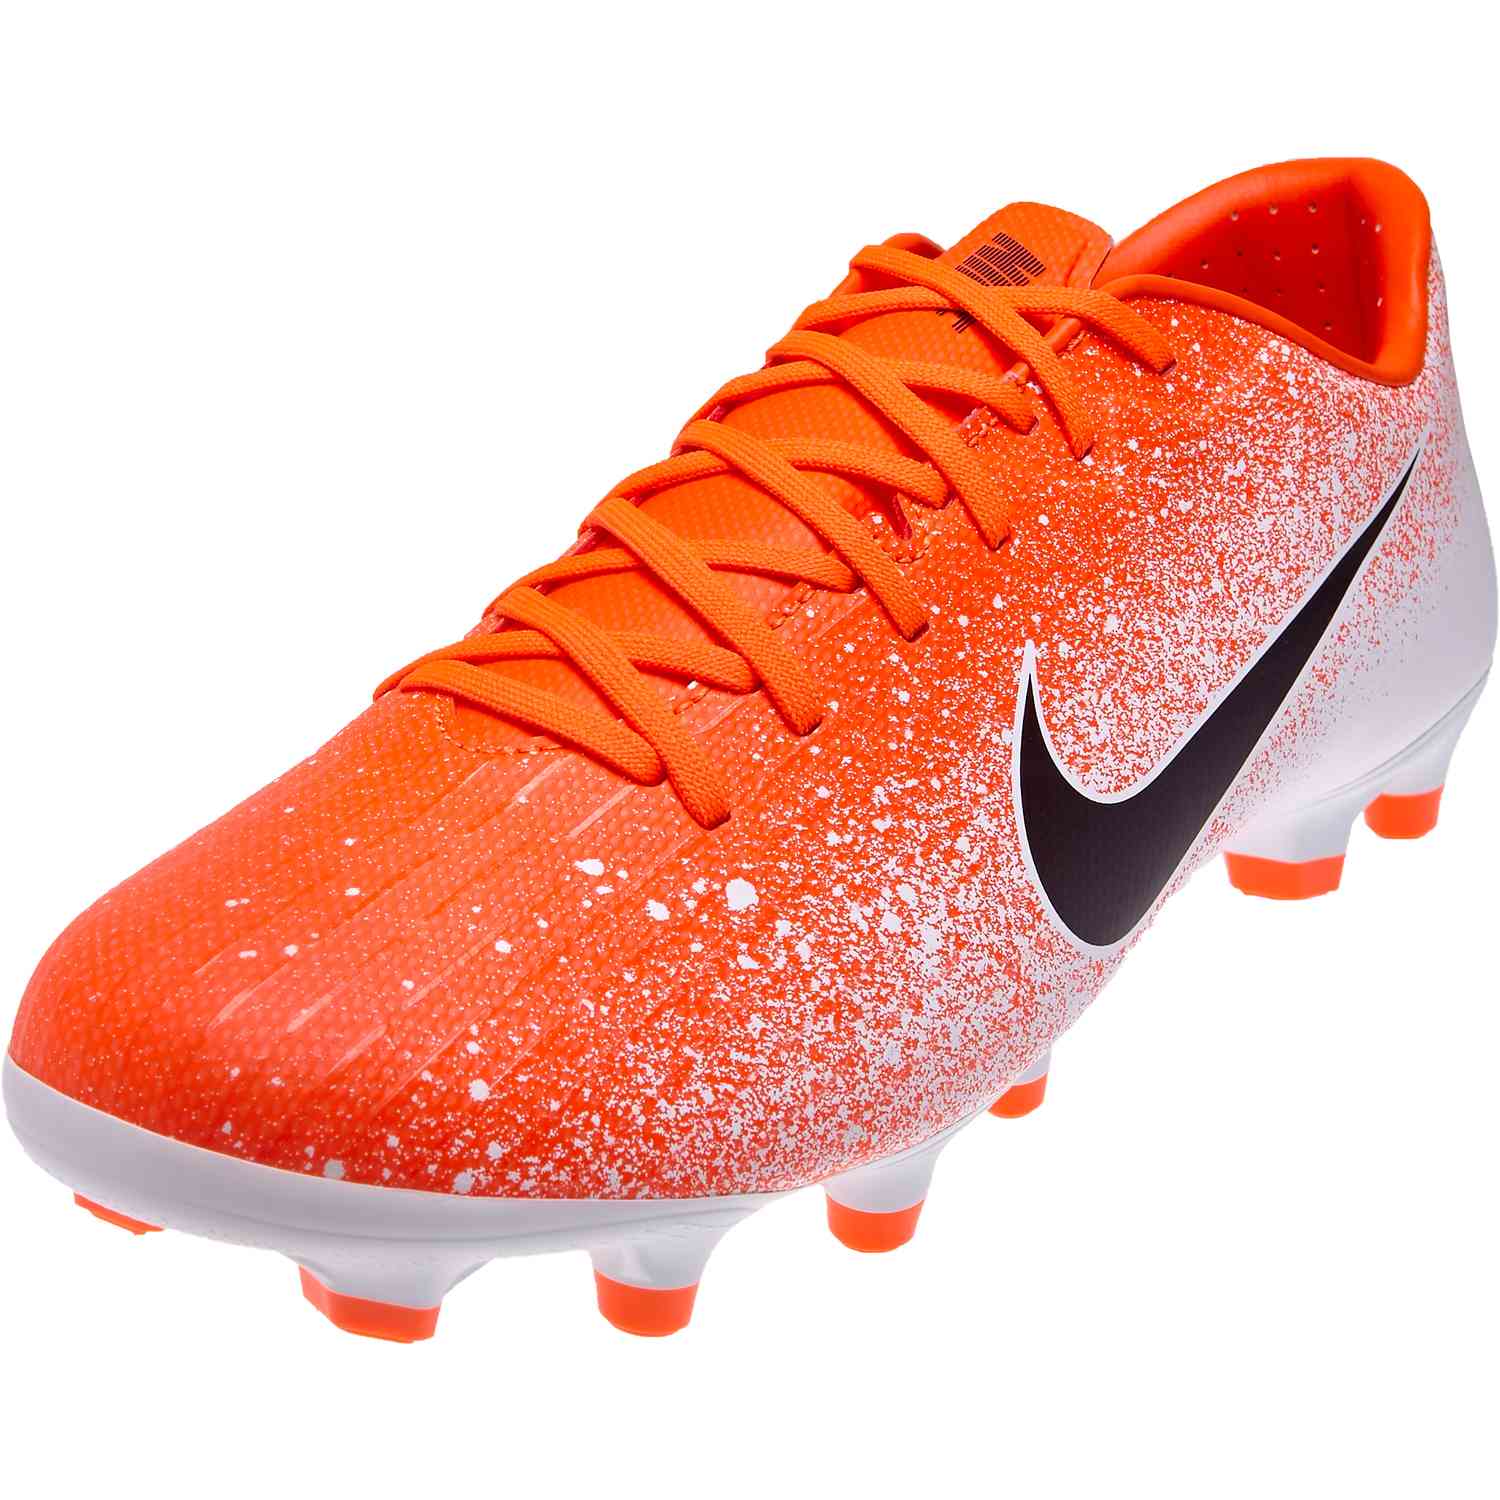 academy youth cleats